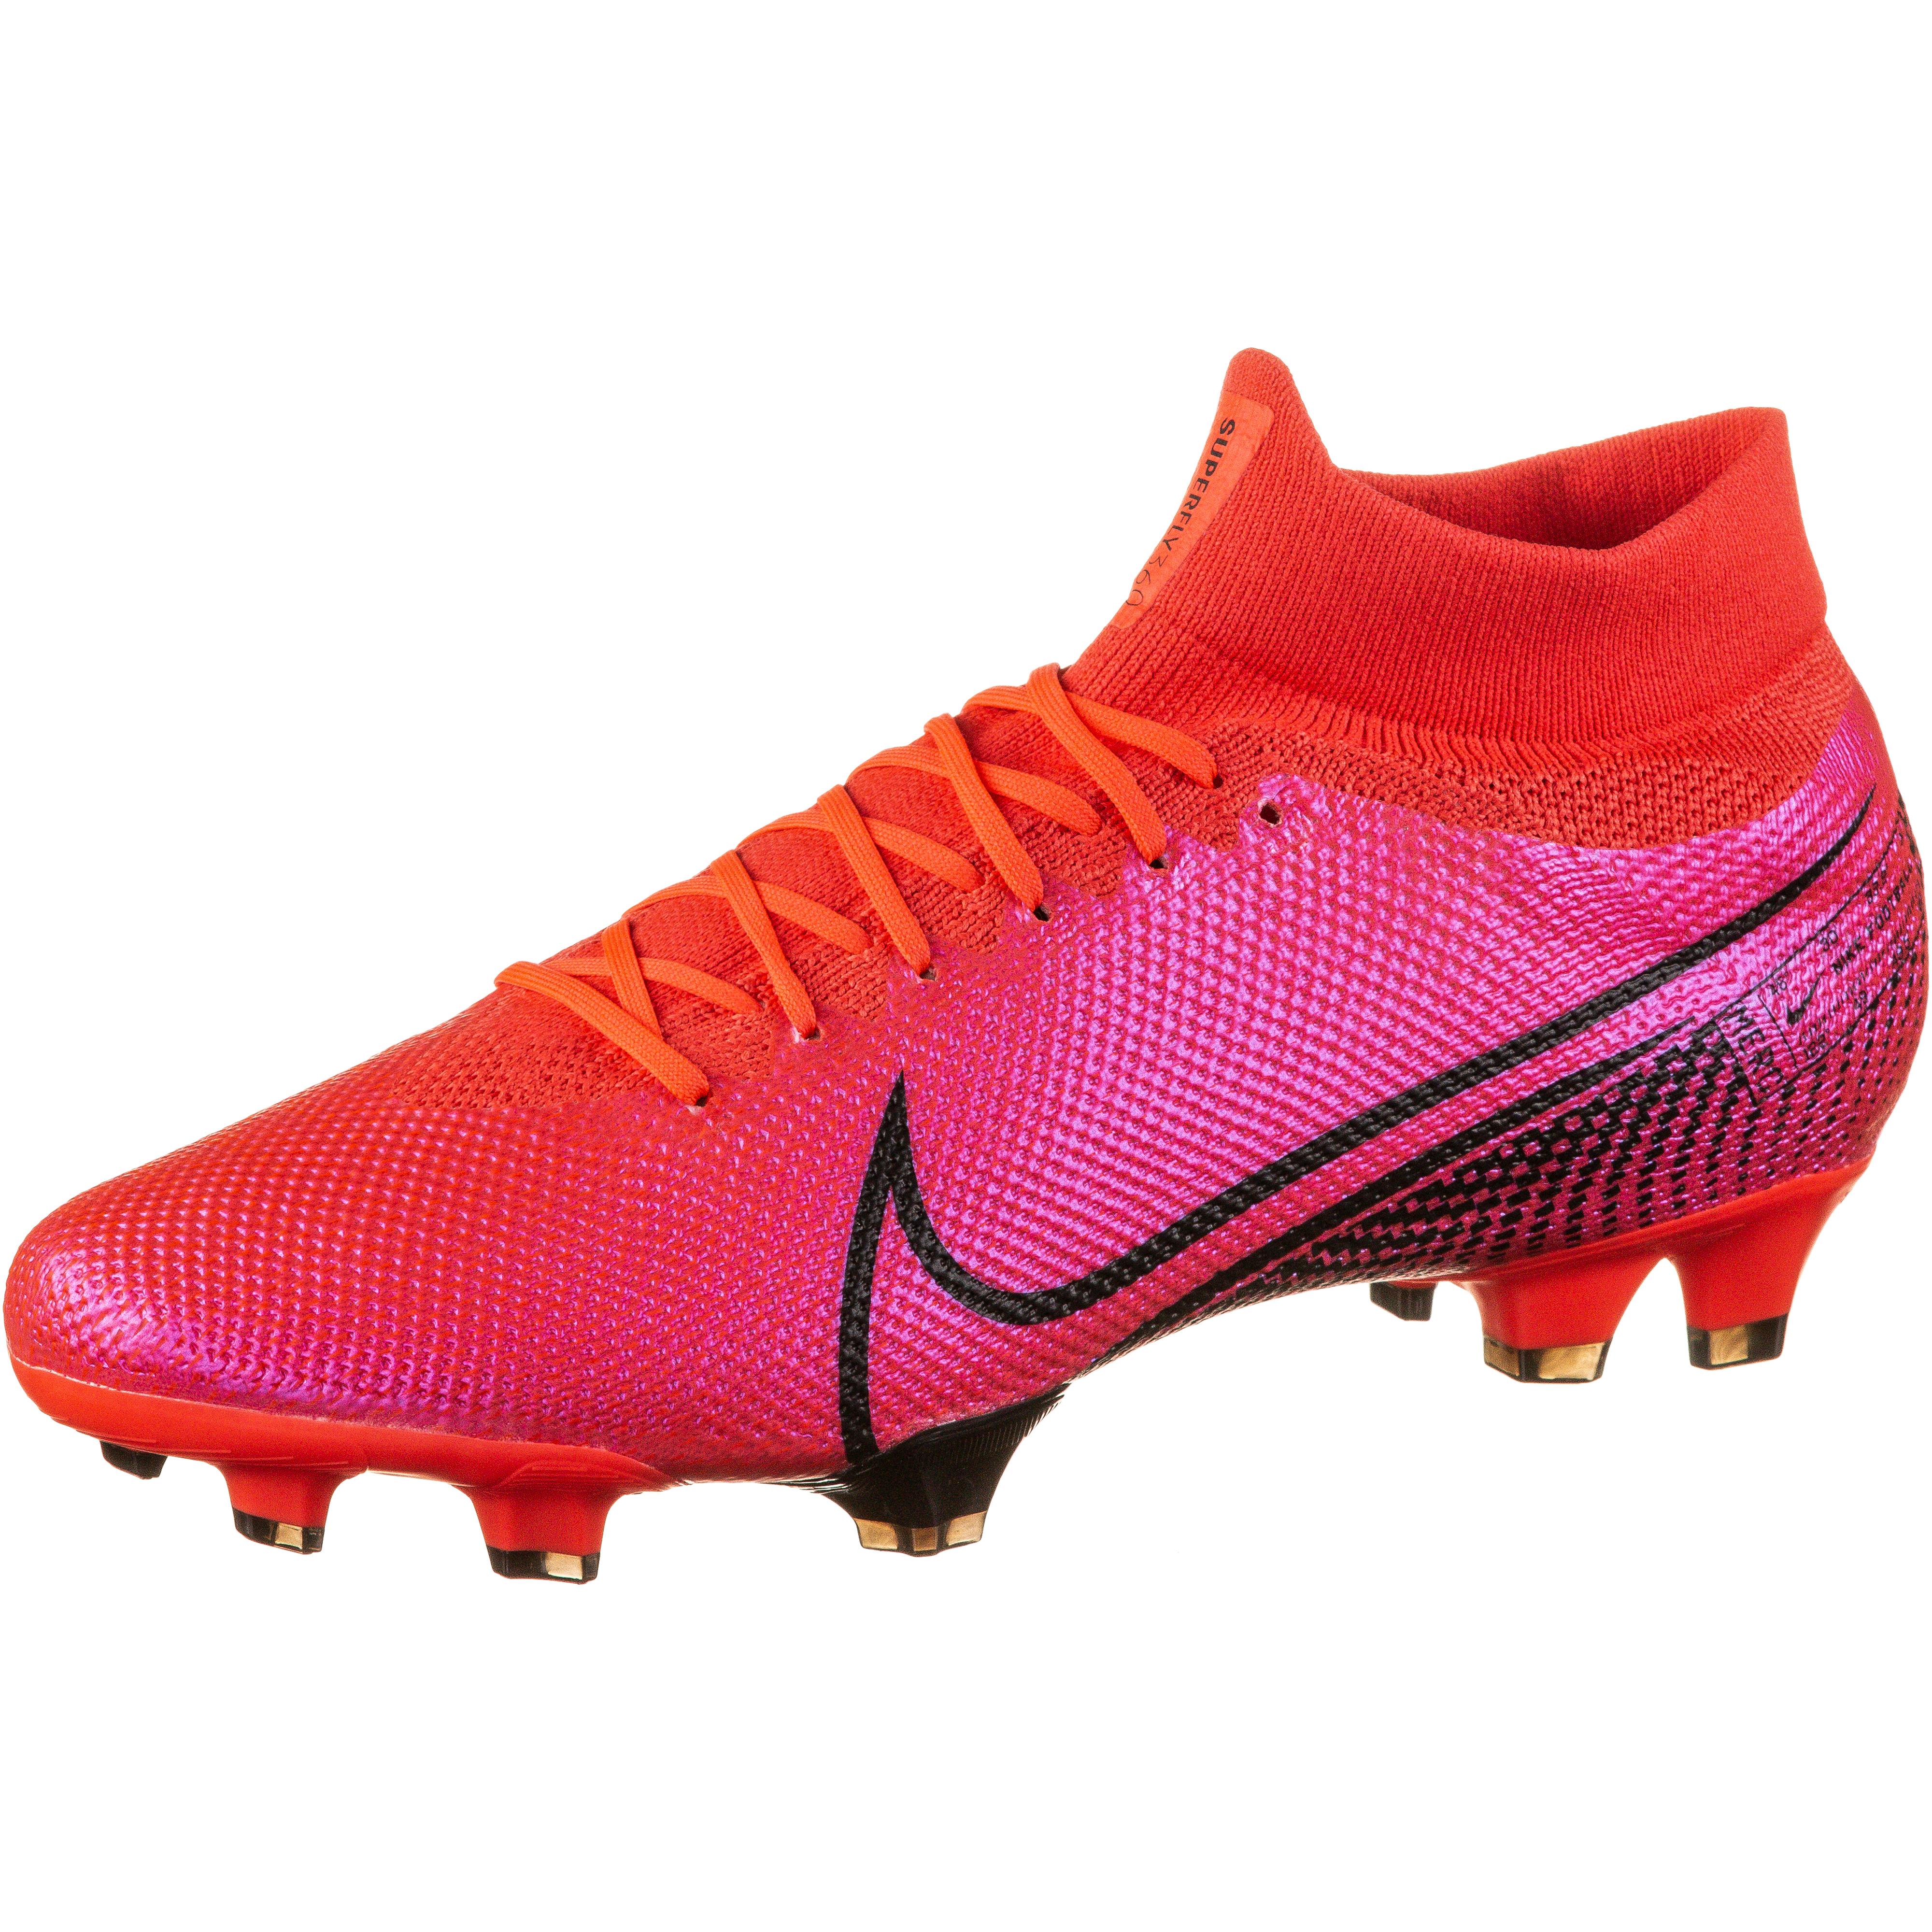 Football Boots Nike Mercurial Superfly VII Elite AG PRO White.